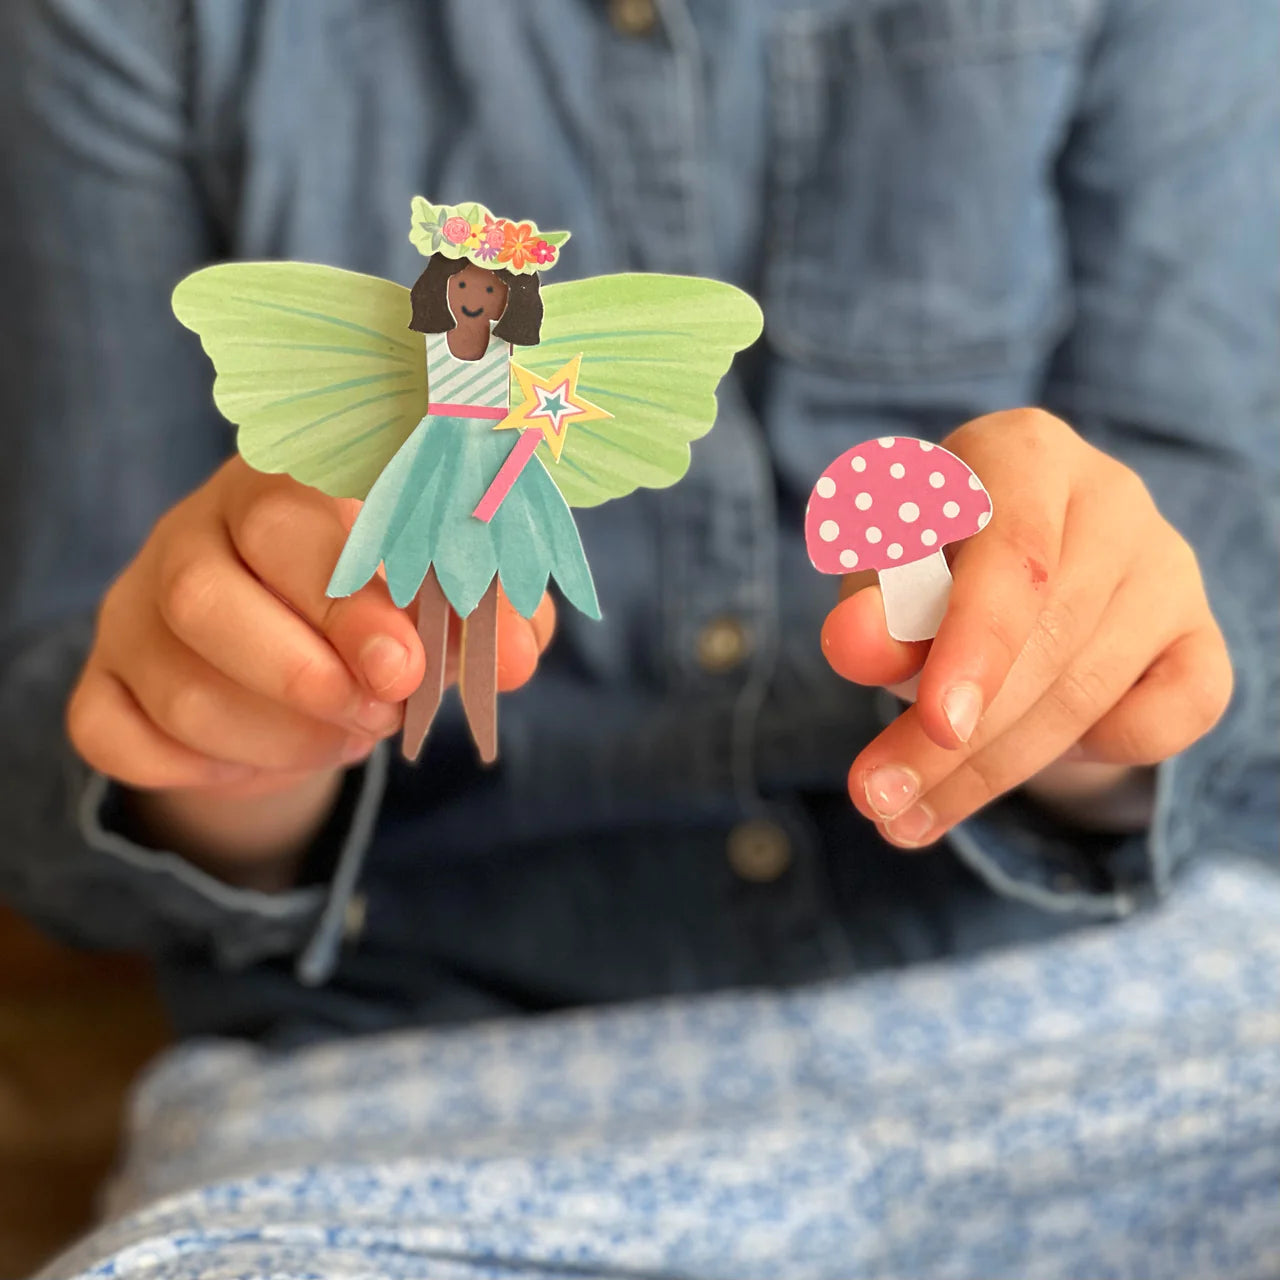 Make Your Own - Fairy Peg Doll Kit - Little Reef and Friends